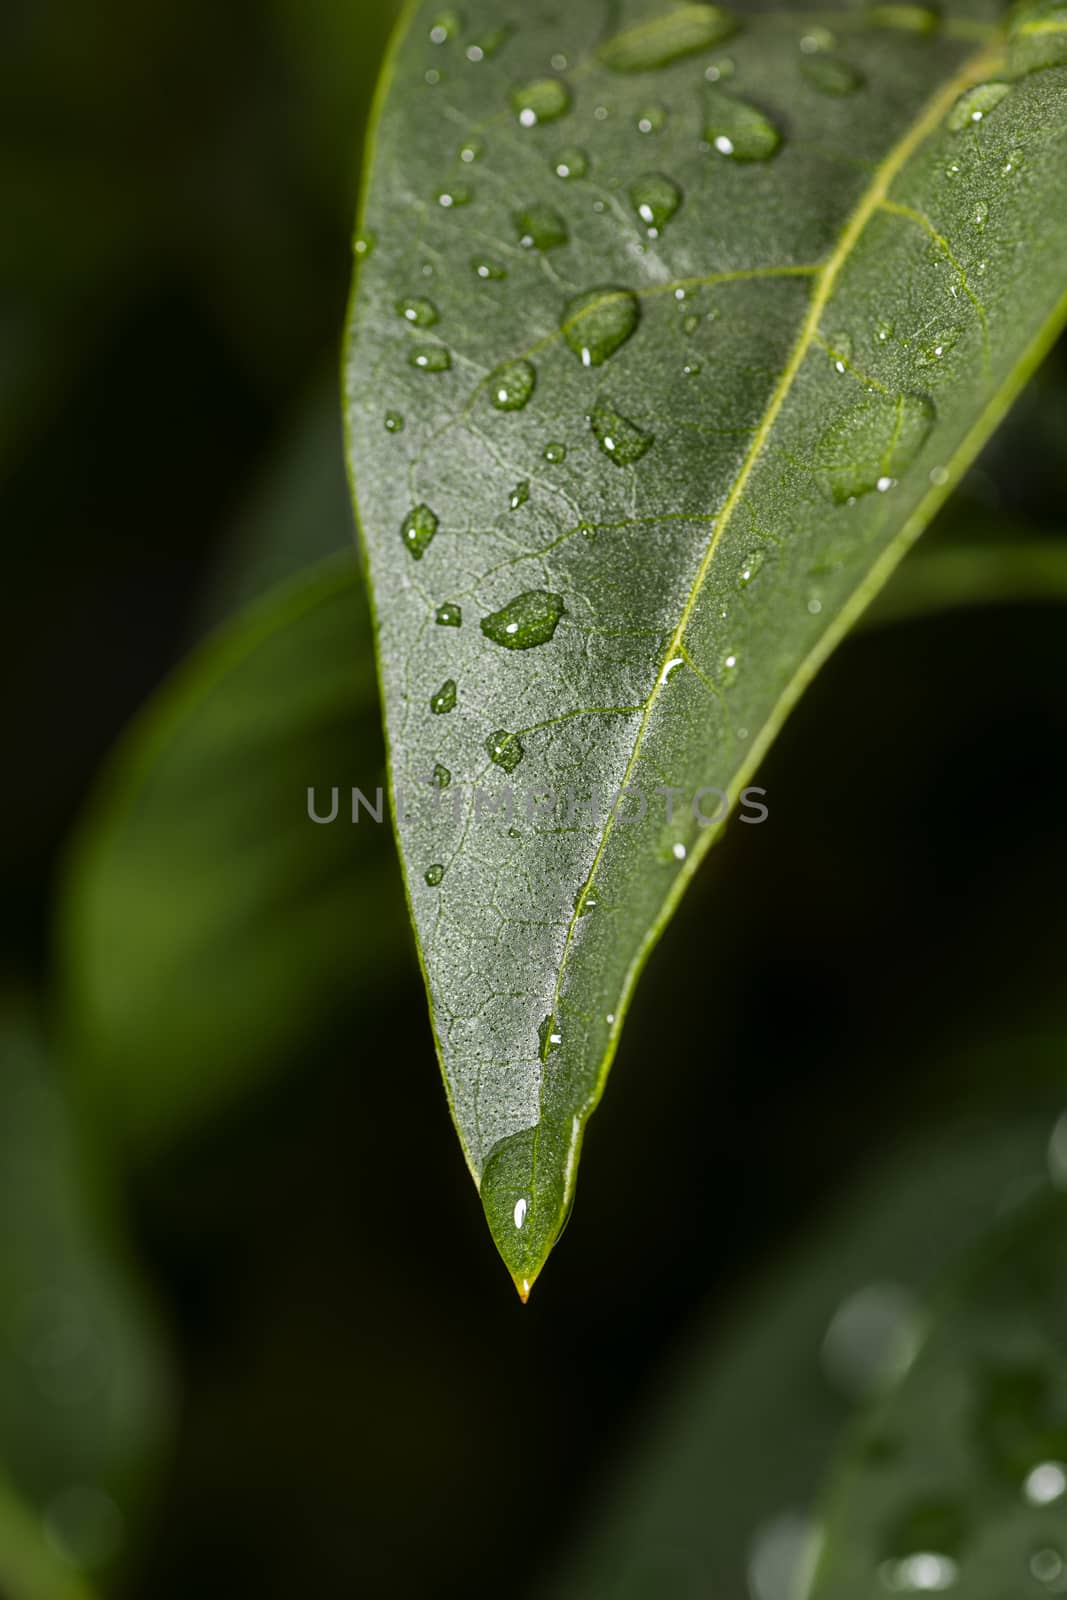 close up of drop of water about to drop from a green leaf